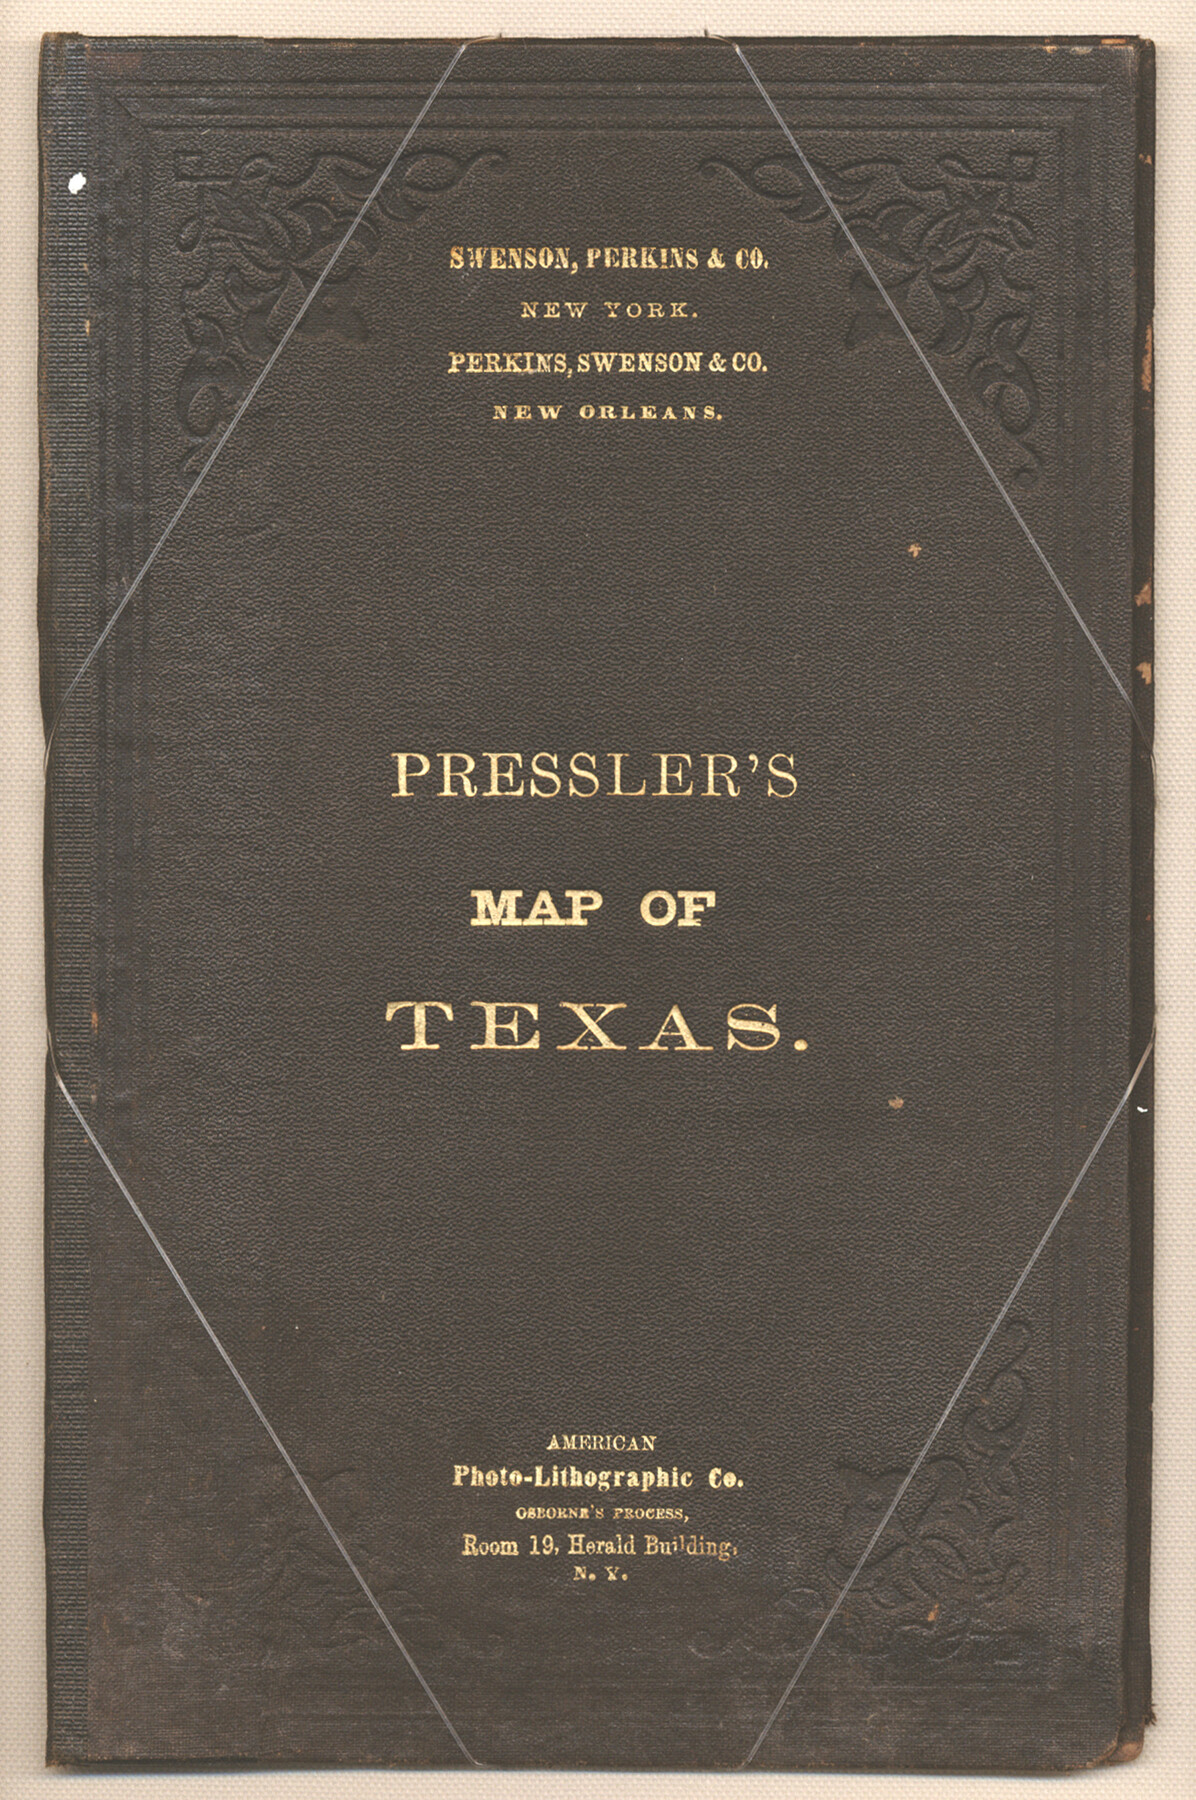 93920, Pressler's Map of Texas, Holcomb Digital Map Collection